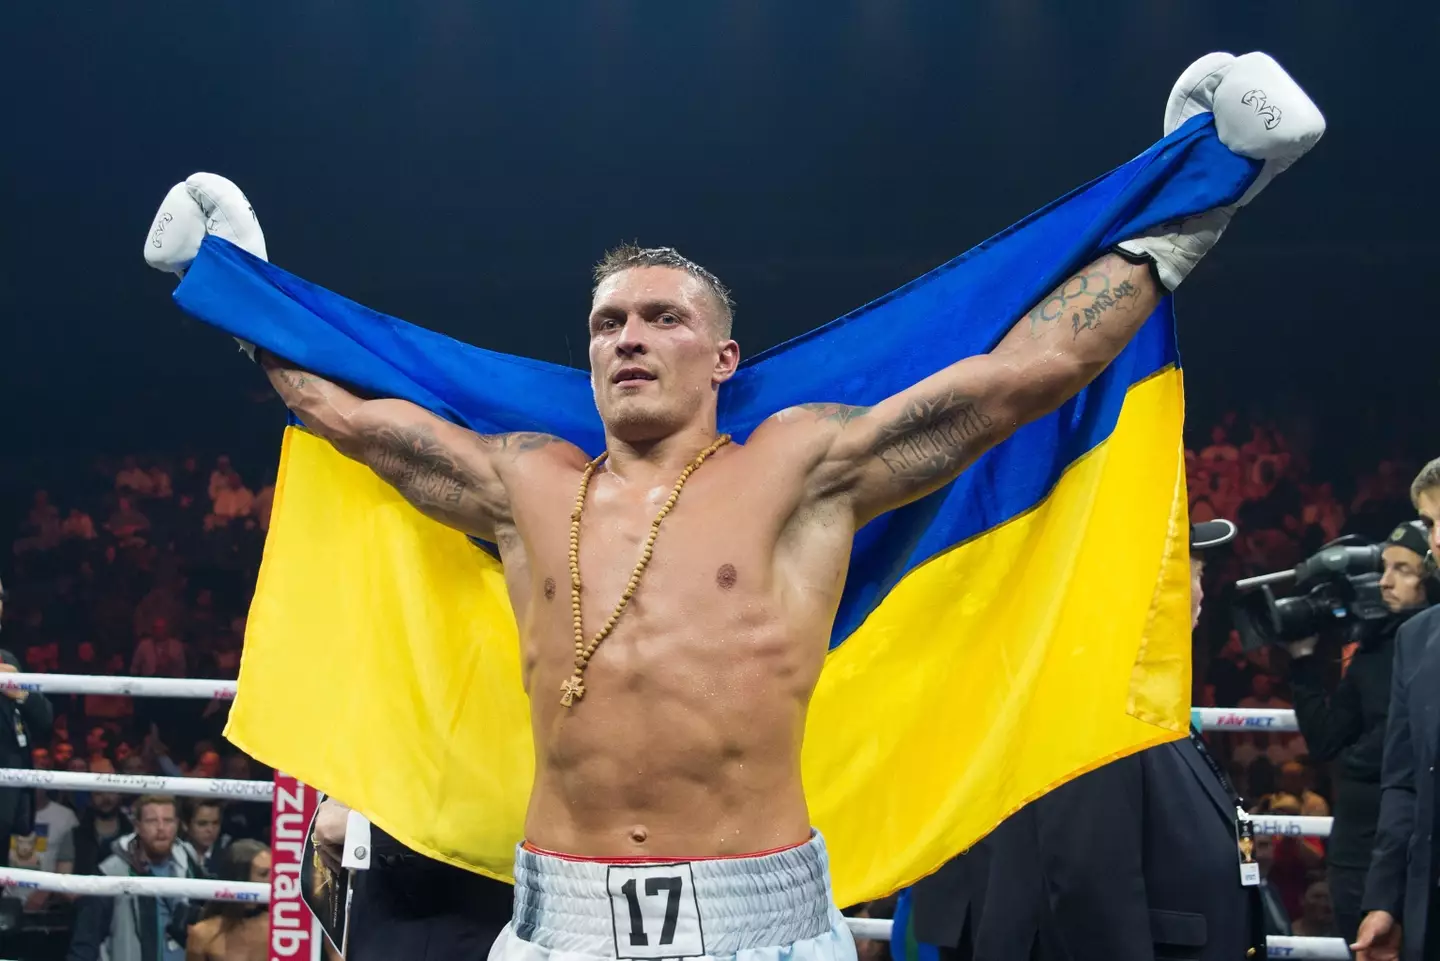 Usyk has returned to Ukraine and called for an end to the war.